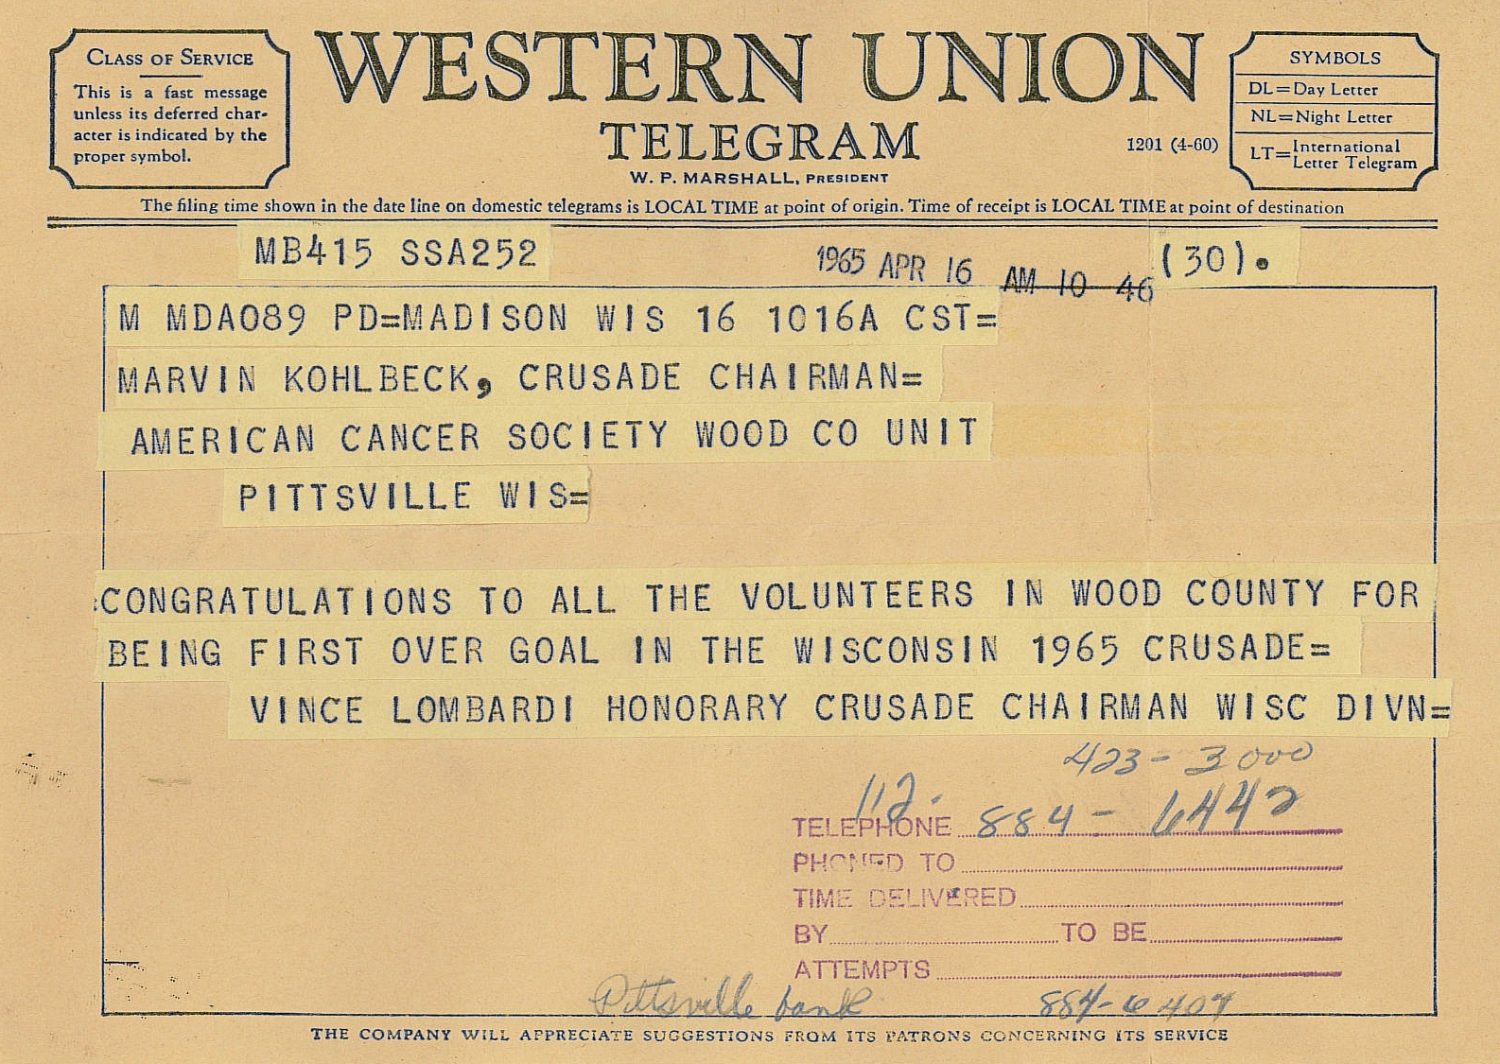 The telegram the author received from Vince Lombardi for leading the Wood County unit of the American Cancer Society to its 1965 fundraising goal.